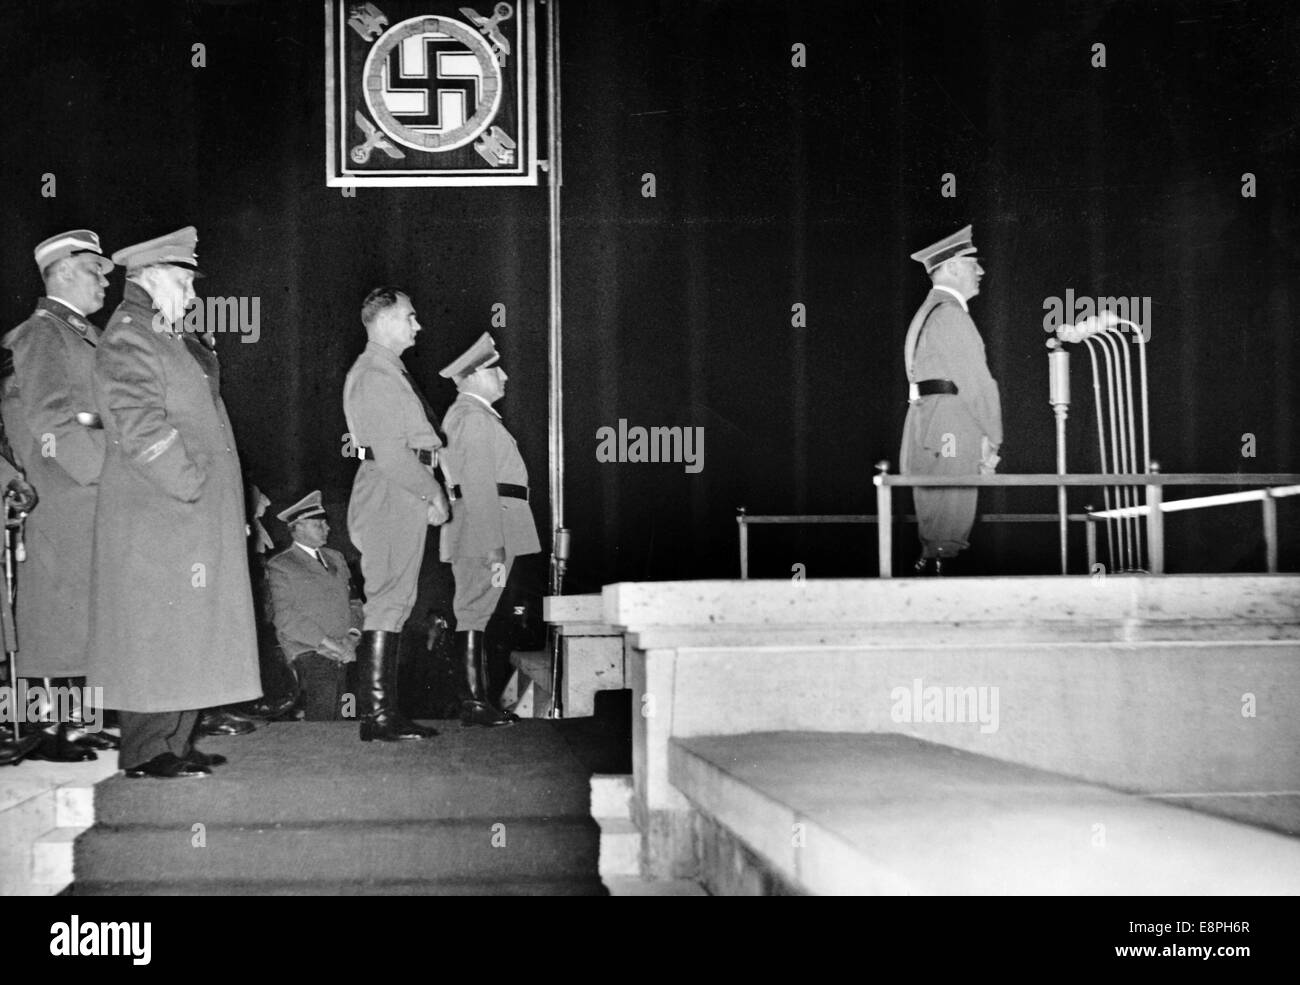 Nuremberg Rally 1937 in Nuremberg, Germany - Adolf Hitler holds a speech in an atmosphere created by searchlights in front of the political leaders of the NSDAP, 110,000 of whom - according to Nazi news reporting - have lined up for a roll call on Zeppelin Field at the Nazi party rally grounds. On the podium from right to left Adolf Hitler, head of the German Labour Front Robert Ley, Reich Minister Rudolf Hess, colonel general Hermann Goering and Hitler's chief adjutant Wilhelm Brueckner. (Flaws in quality due to the historic picture copy) Fotoarchiv für Zeitgeschichtee - NO WIRE SERVICE - Stock Photo